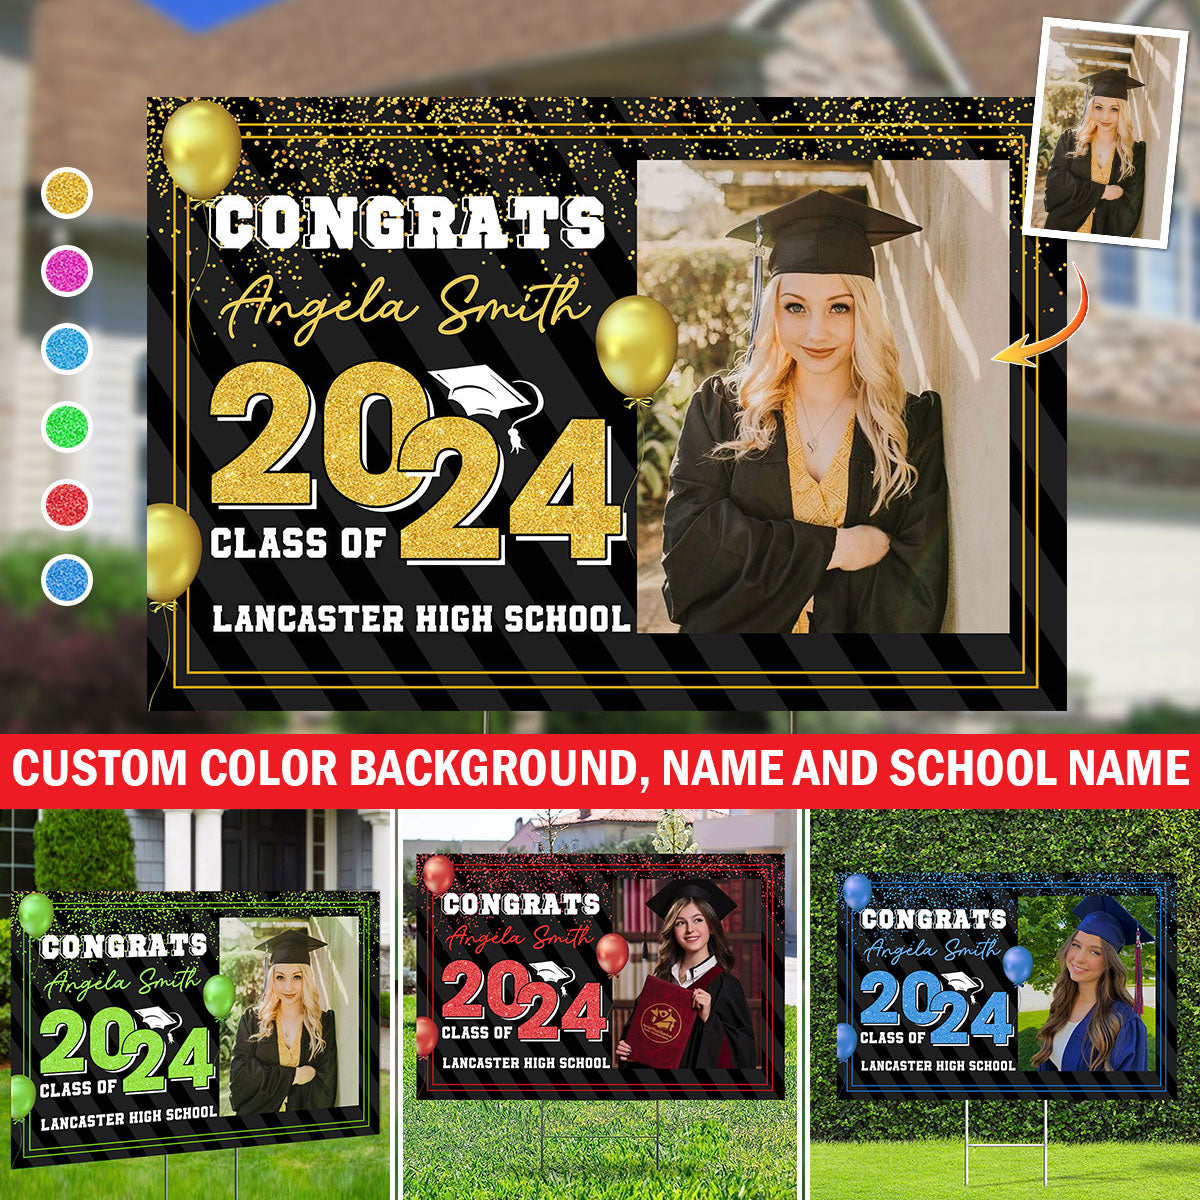 Congrats Class Of 2024, Custom Background, Photo And Text - Personalized Lawn Sign, Yard Sign, Graduation Gift